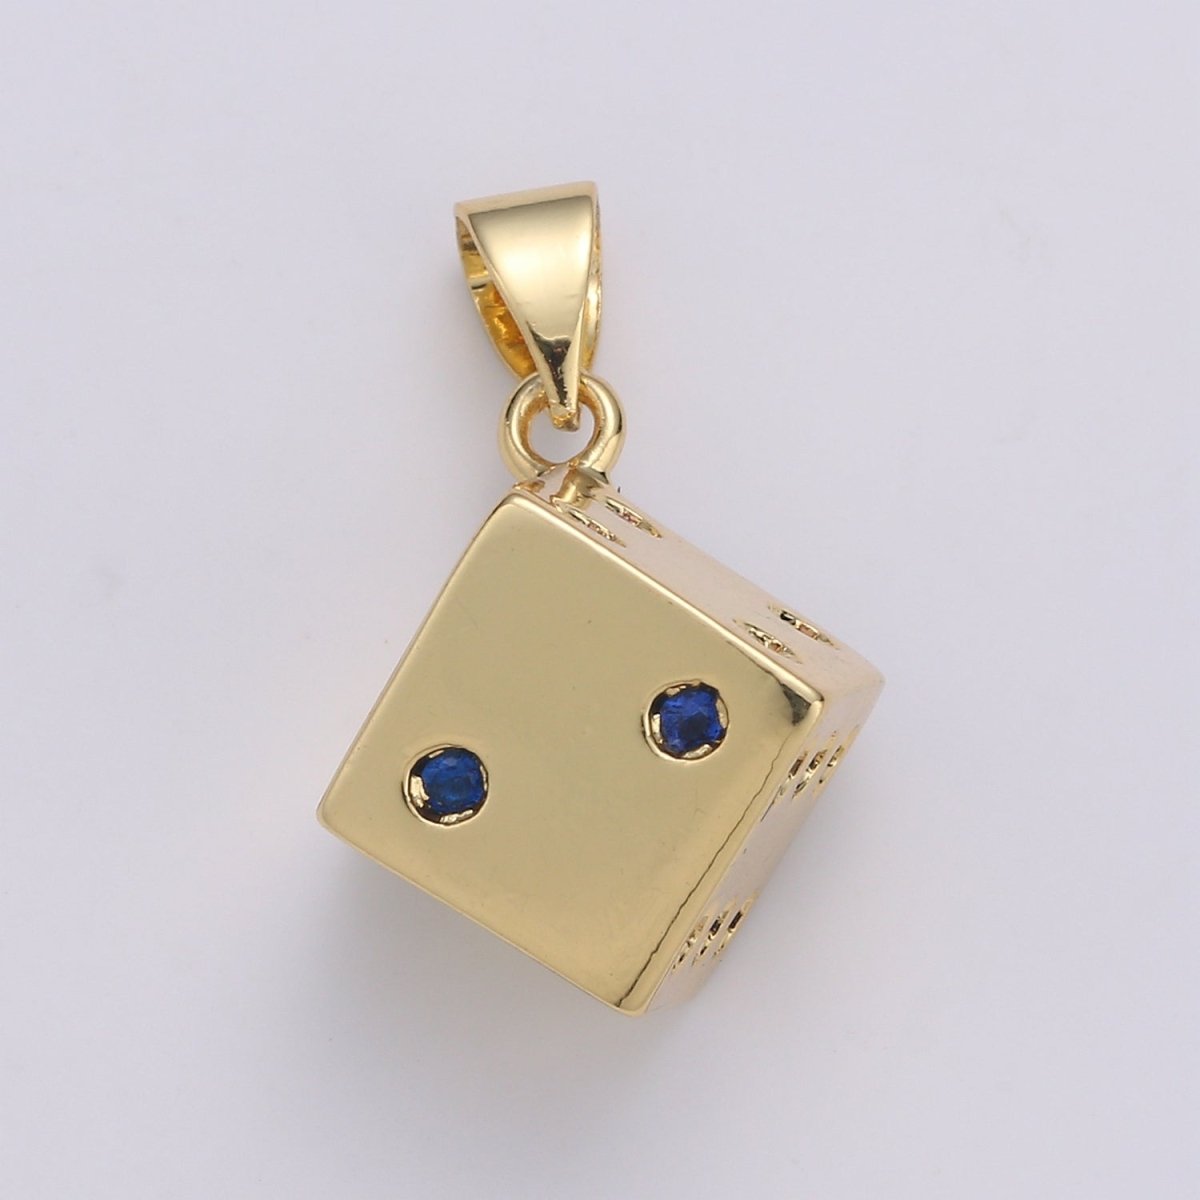 24K Gold Filled Dice, Dainty Dice, Gold Lucky Dice Charm Necklace Jewelry Craft Supply For Necklace Earring Bracelet Component | J249 - DLUXCA